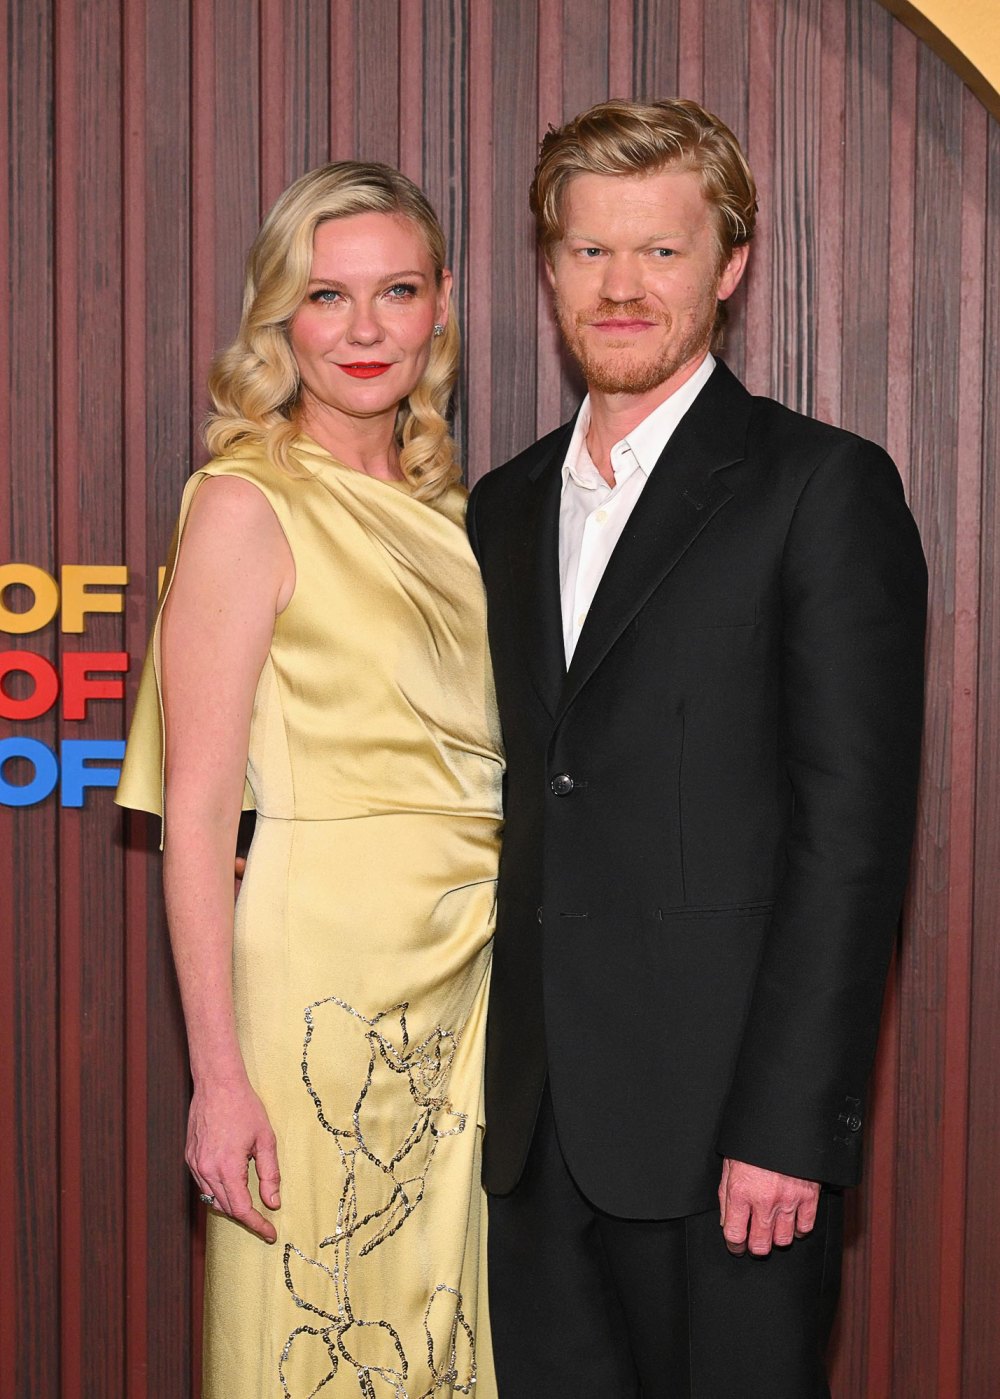 Jesse Plemons has a lot more energy since losing 50 pounds. He shares his weight loss inspiration 845